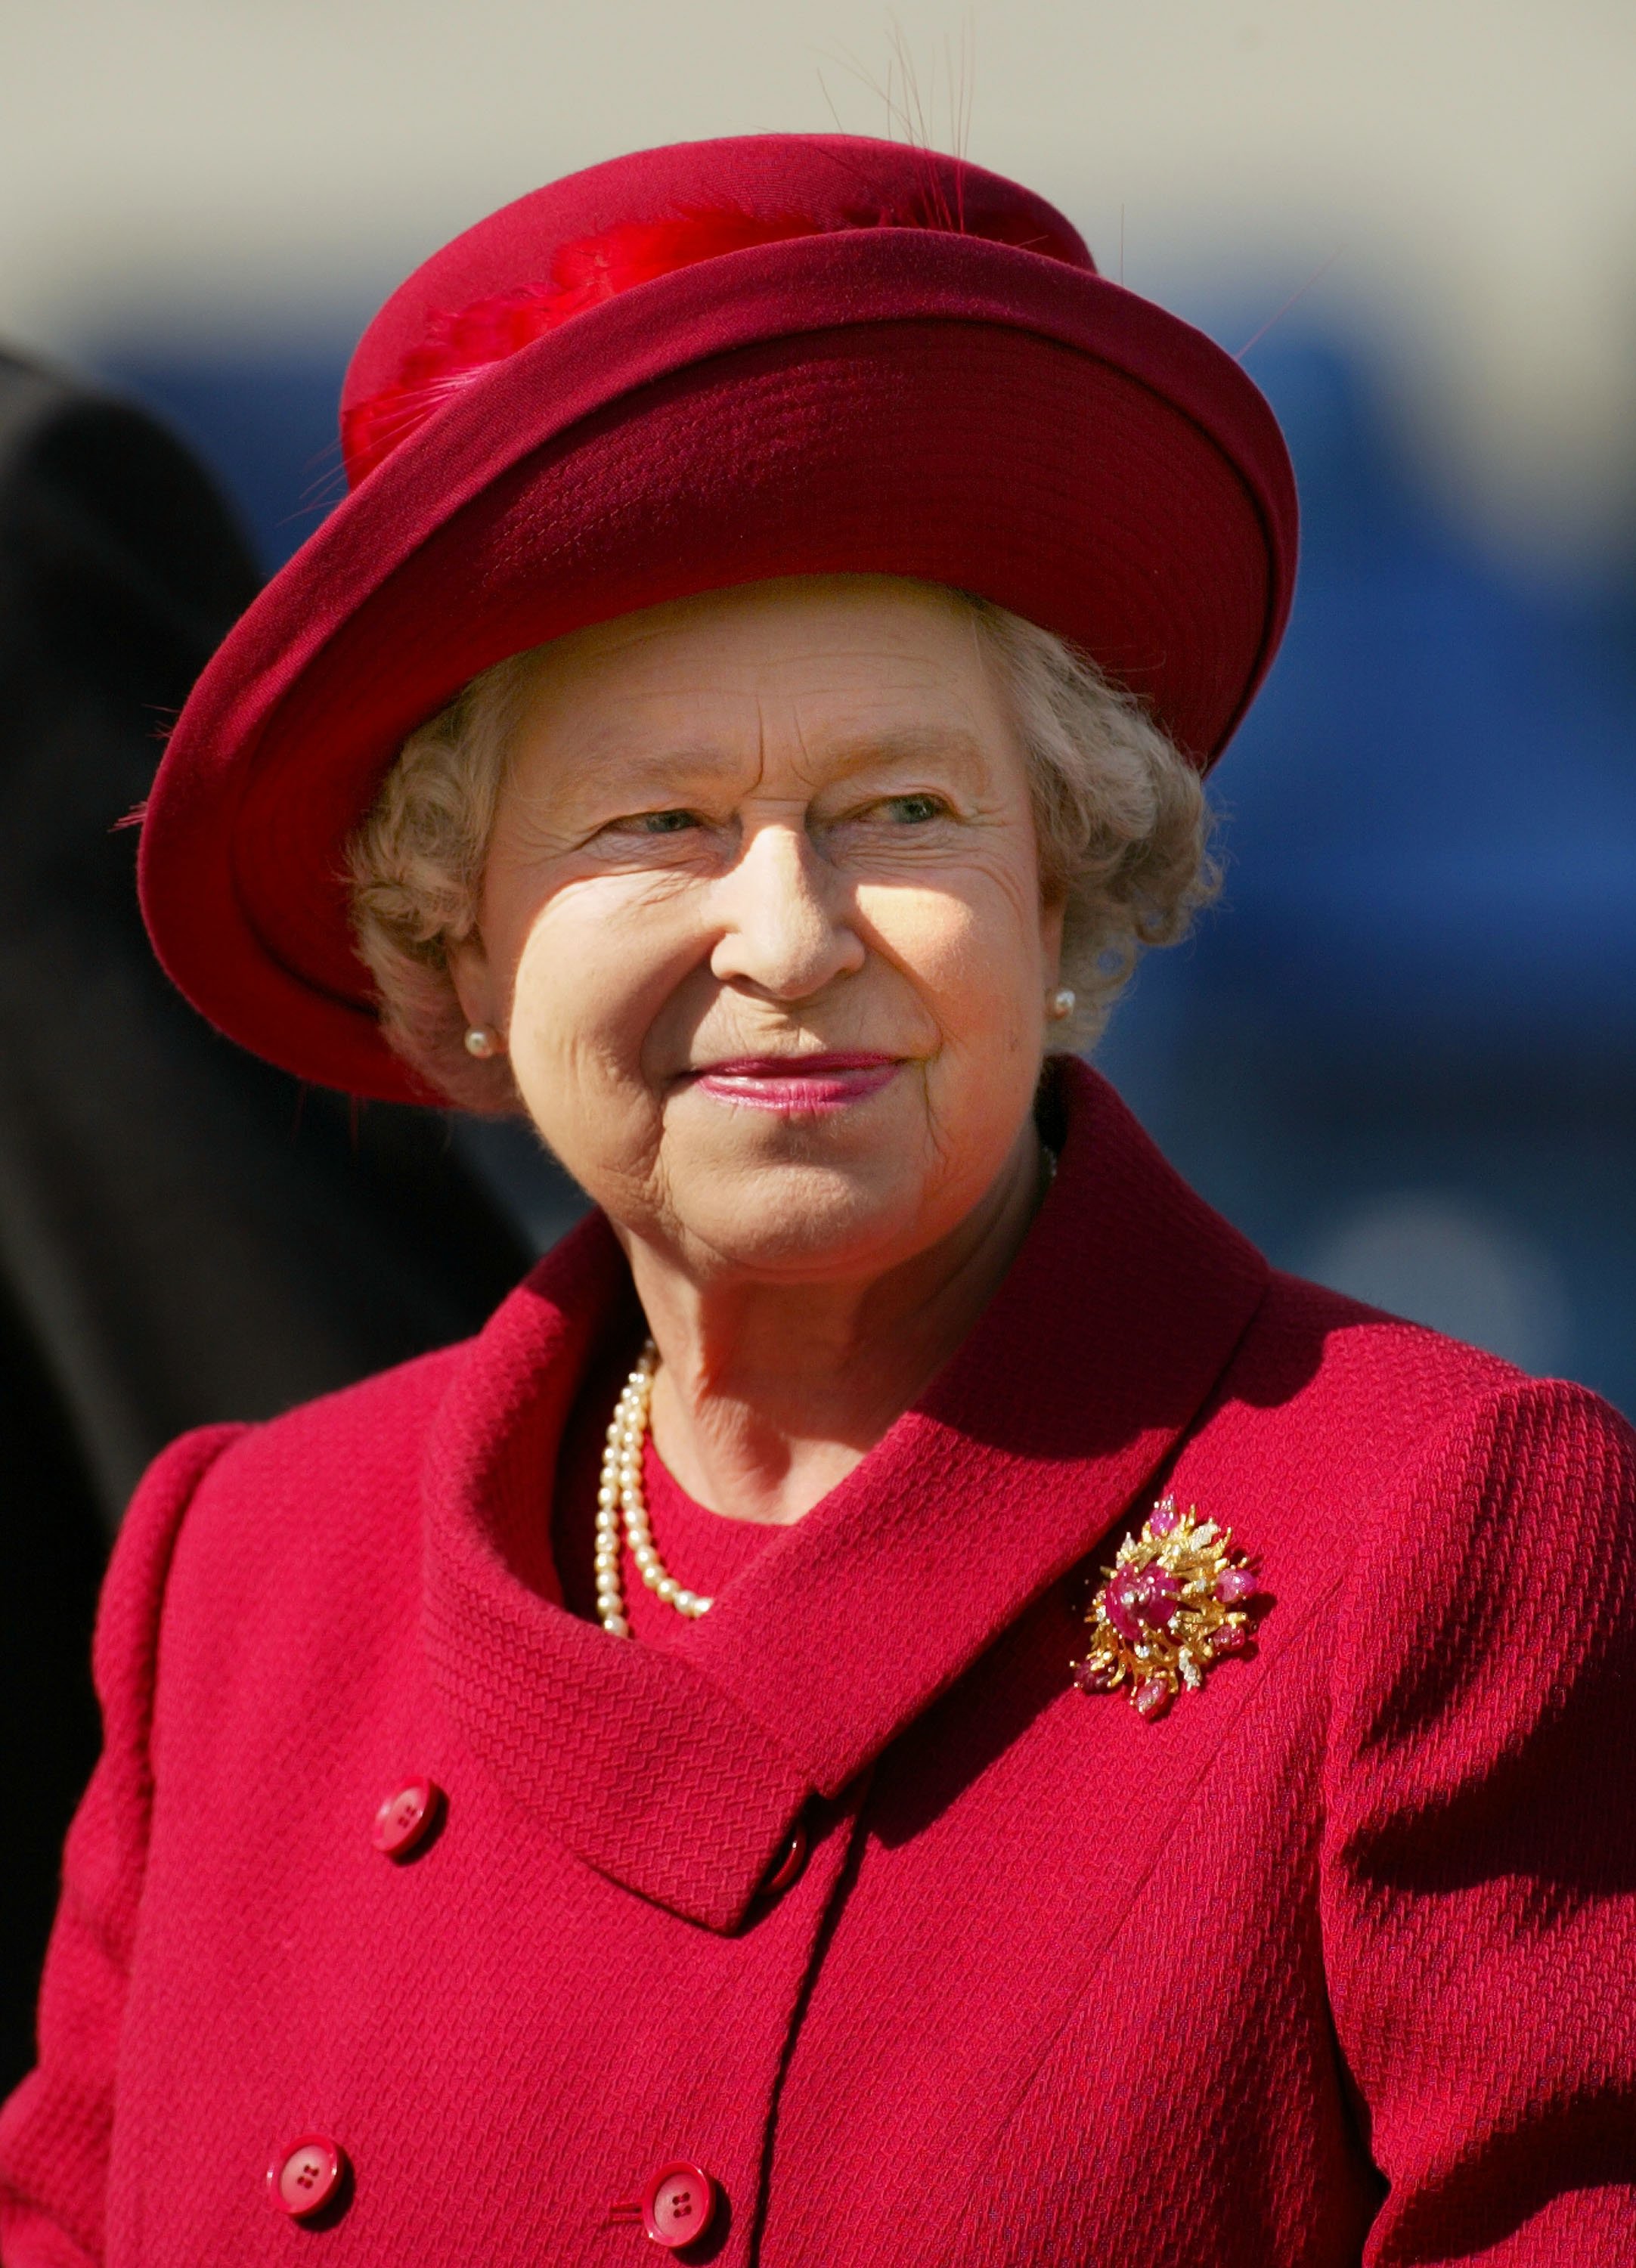 Queen Elizabeth II smiling at The Royal Windsor Horse Show, 2002, Windsor Great Park, England. | Photo: Getty Images